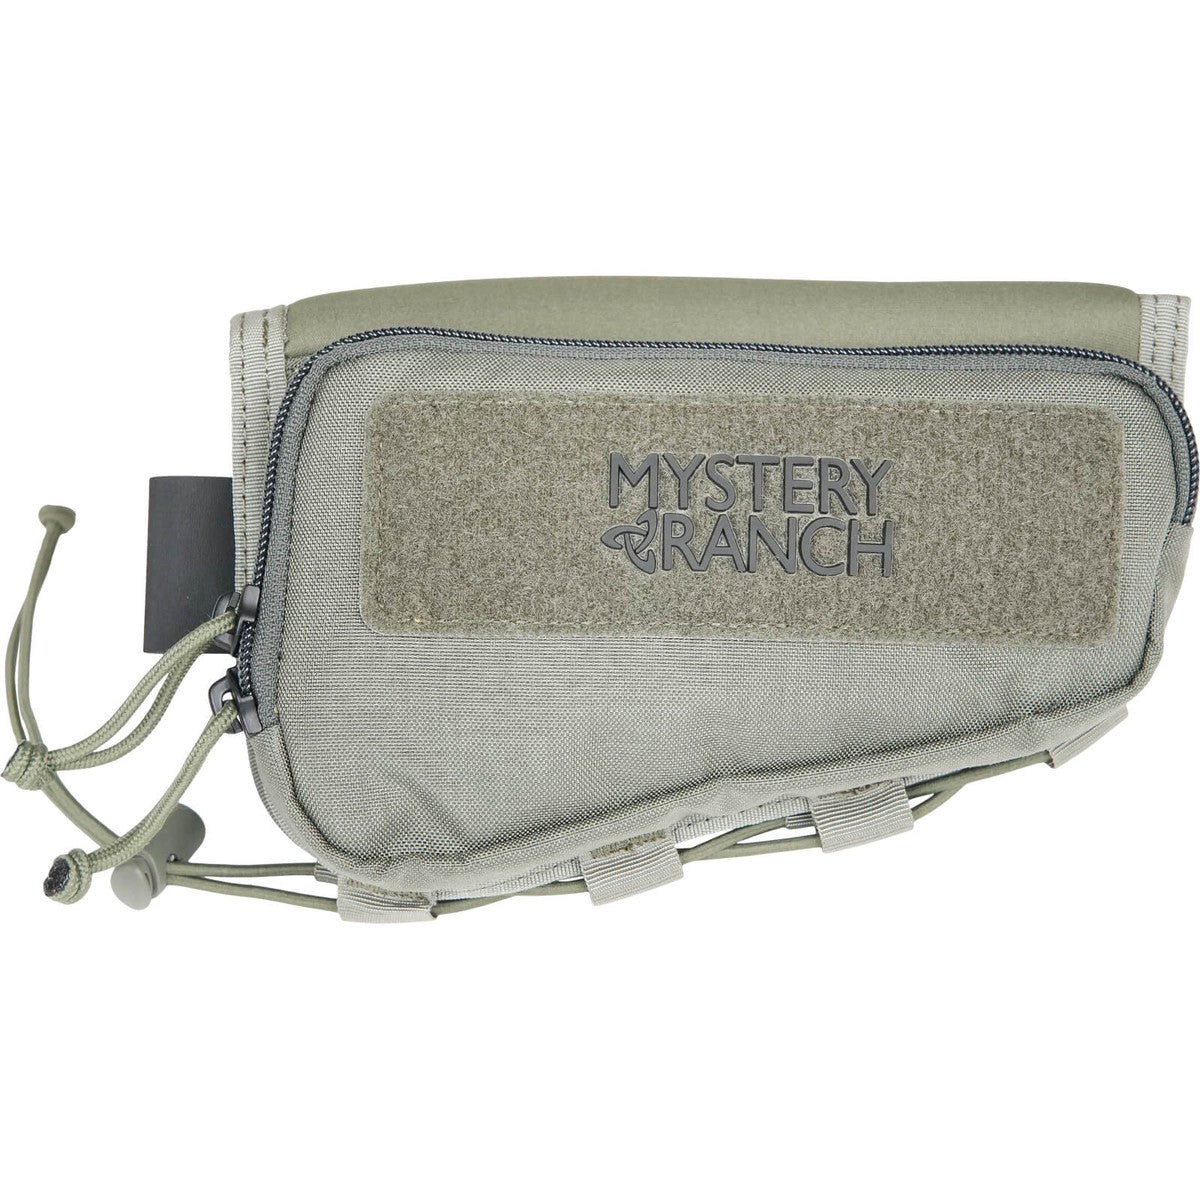 Mystery Ranch Cheeky Riser Lefty -  - Mansfield Hunting & Fishing - Products to prepare for Corona Virus